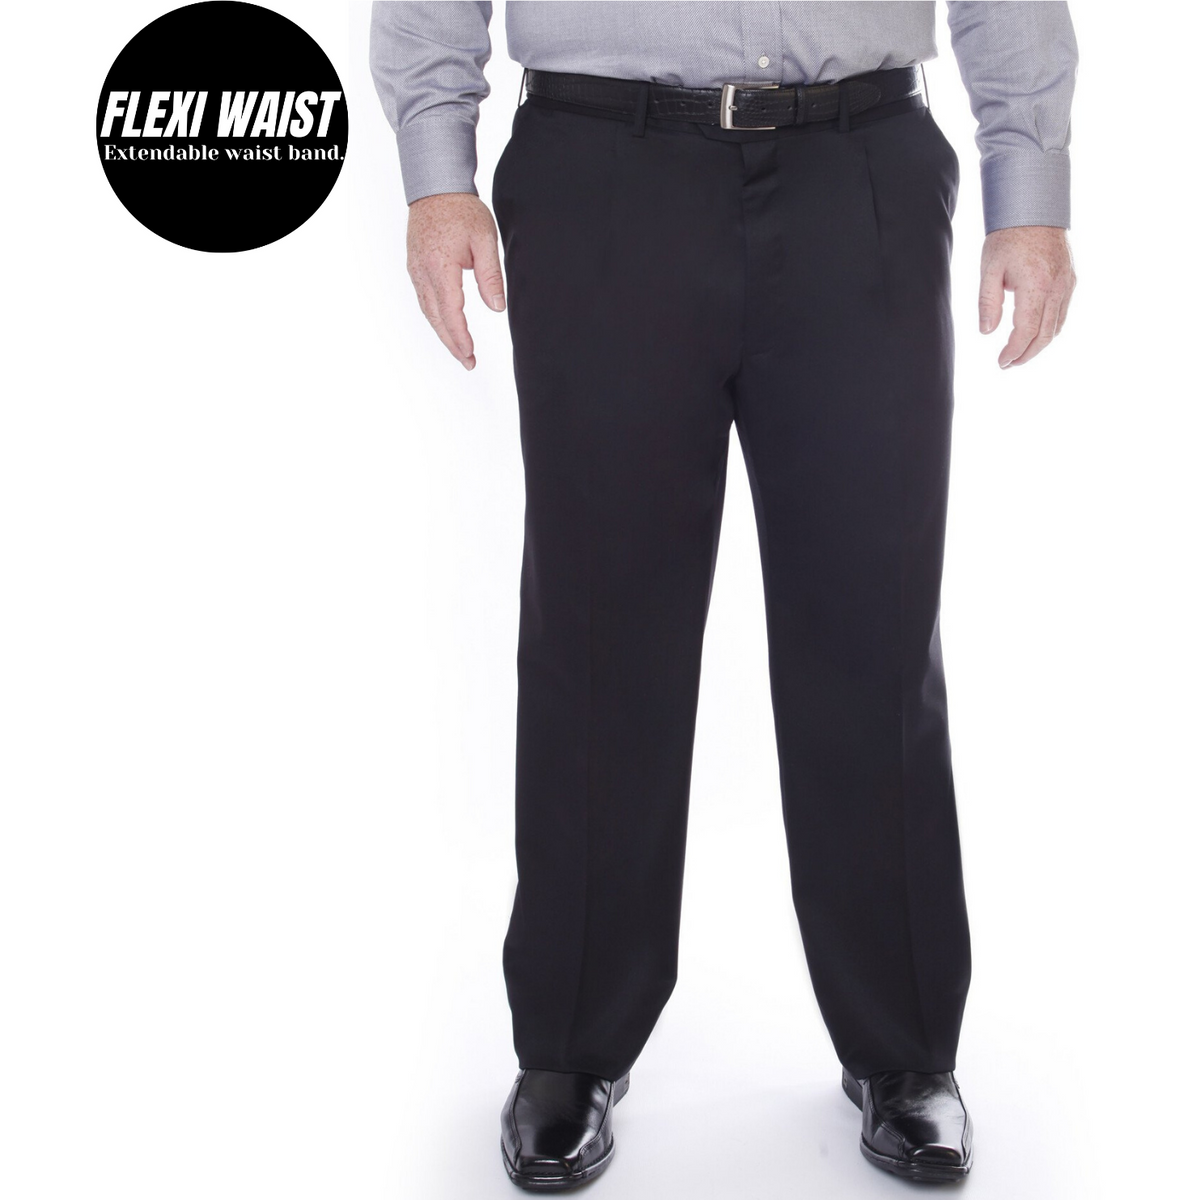 City Club Diplomat PWLG Trousers